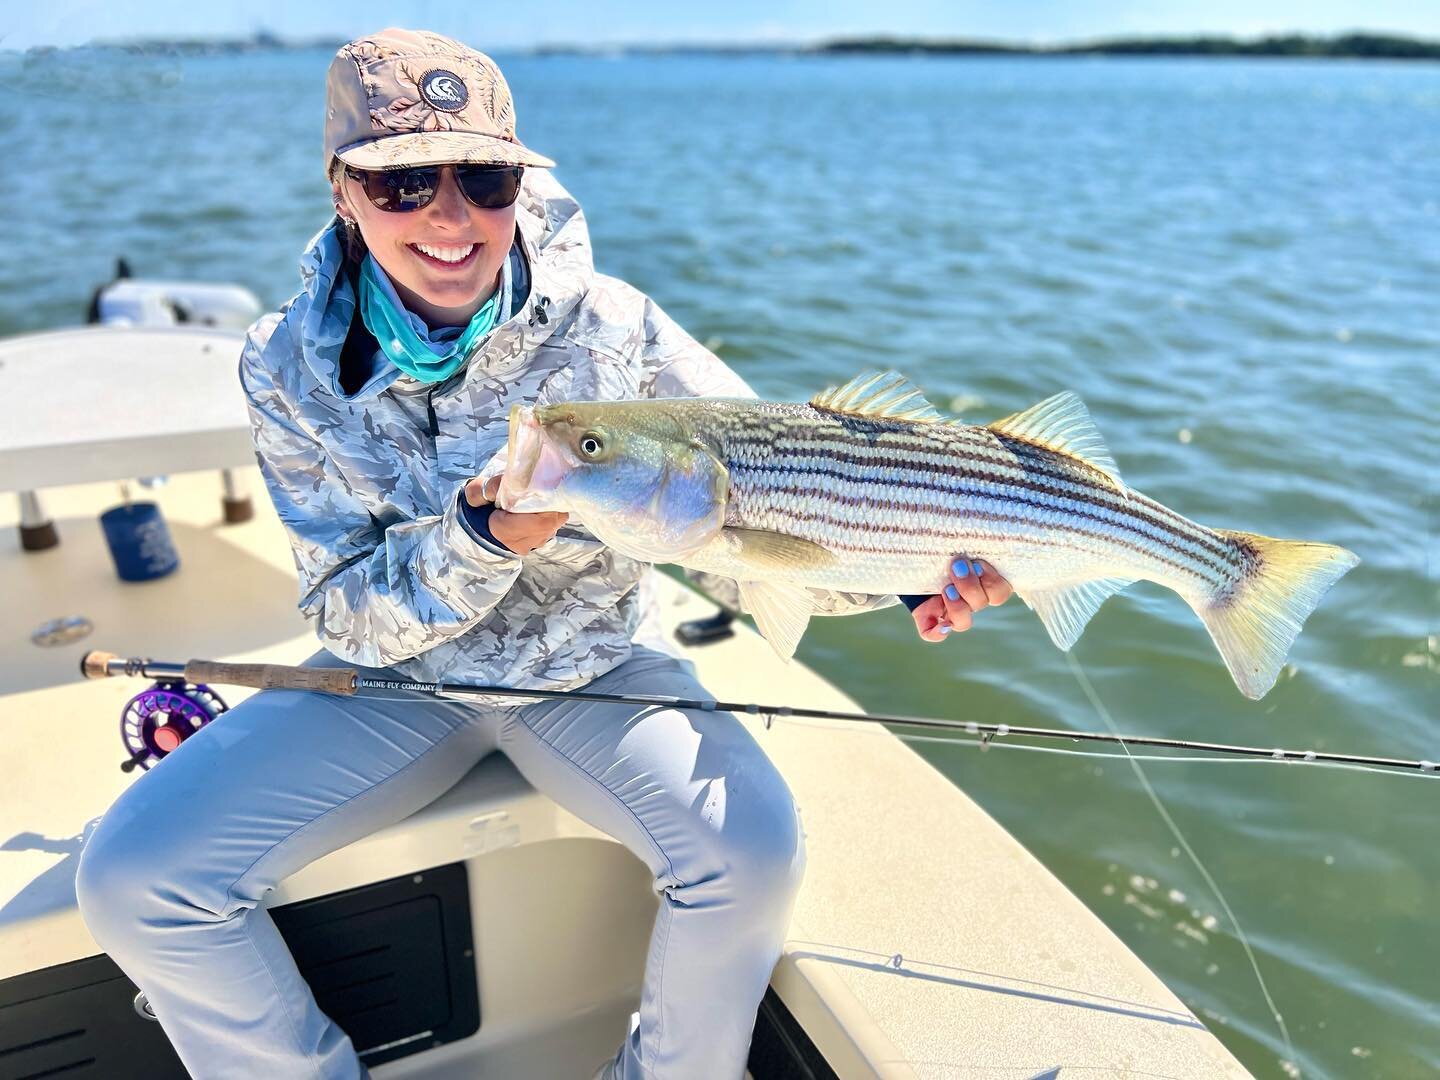 Despite the drop in ocean temp &amp; high winds we experienced this week, fishing remains great! @hooklineandsmile persevered and was rewarded with some epic sight-fishing and boat-side eats in the skinny skinny on our trip! Congrats on your first Ma